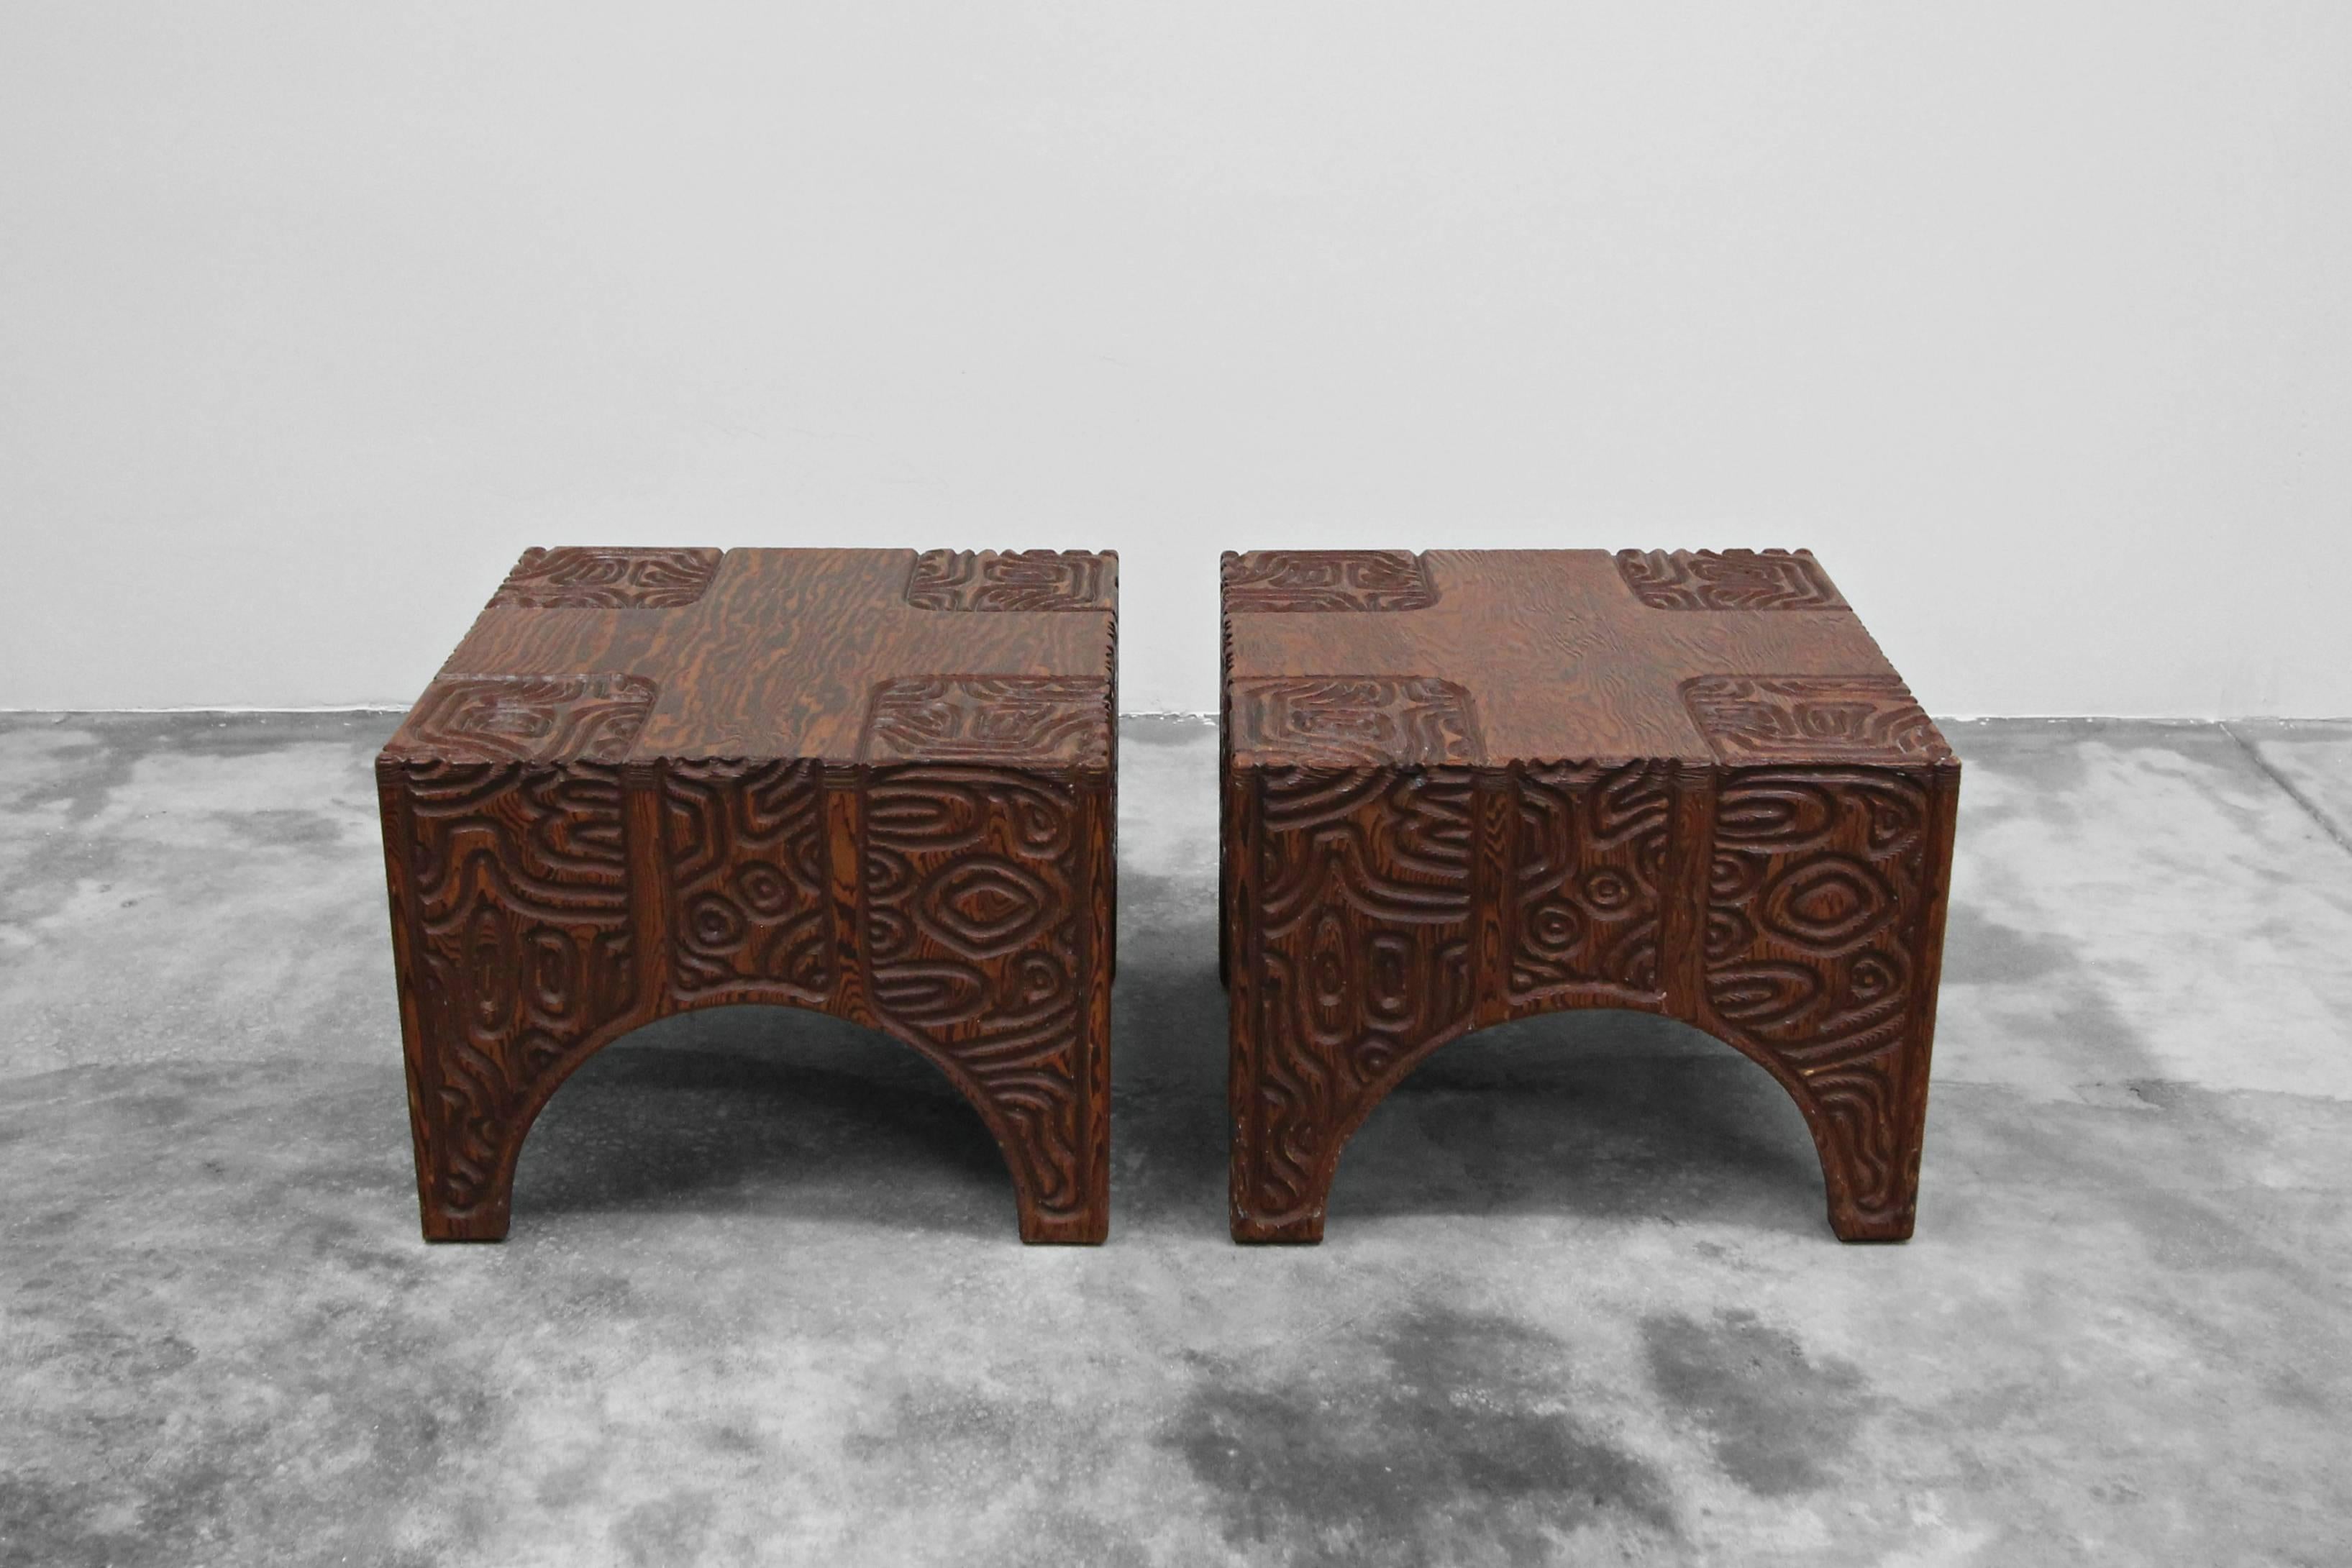 20th Century Pair of Midcentury Panelcarve Style Carved Wood End Tables by Sherrill Broudy